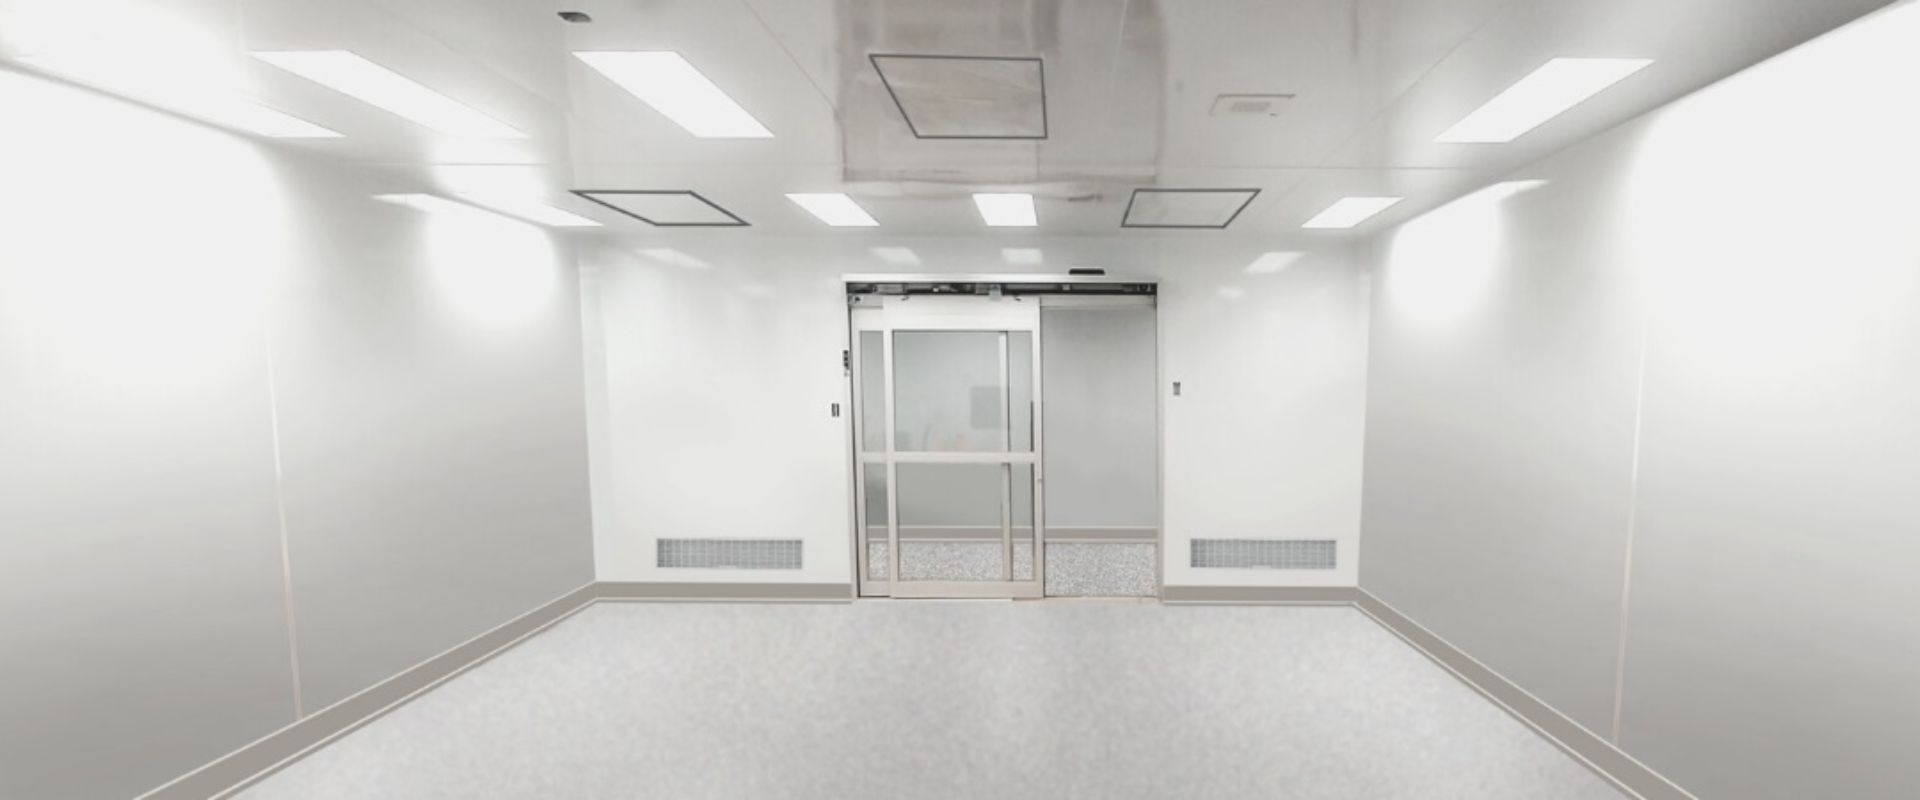 CLASS 10000 ISO 7 CLEANROOM FOR ELECTRONIC COMPONENT PRODUCTION